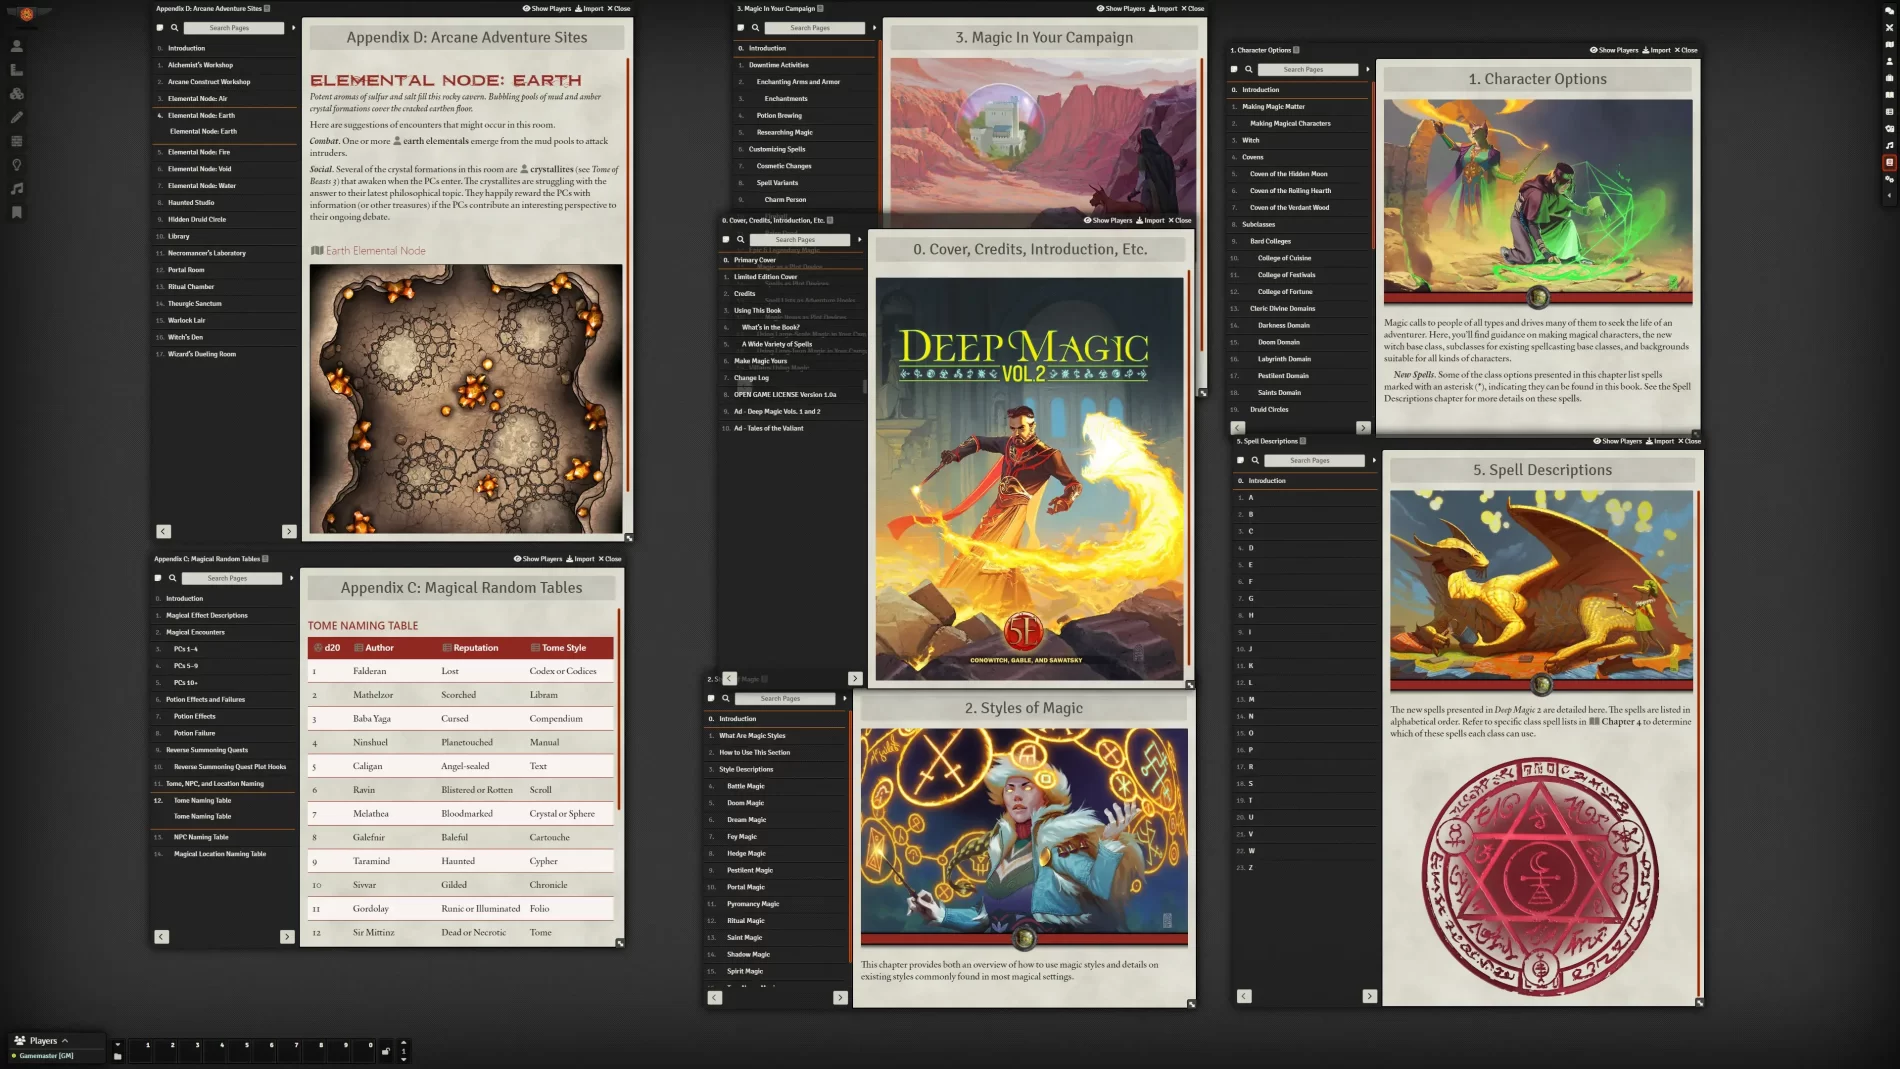 Deep Magic Volume 2 for 5th Edition - Kobold Press, Player Options, Black  Flag Reference Document